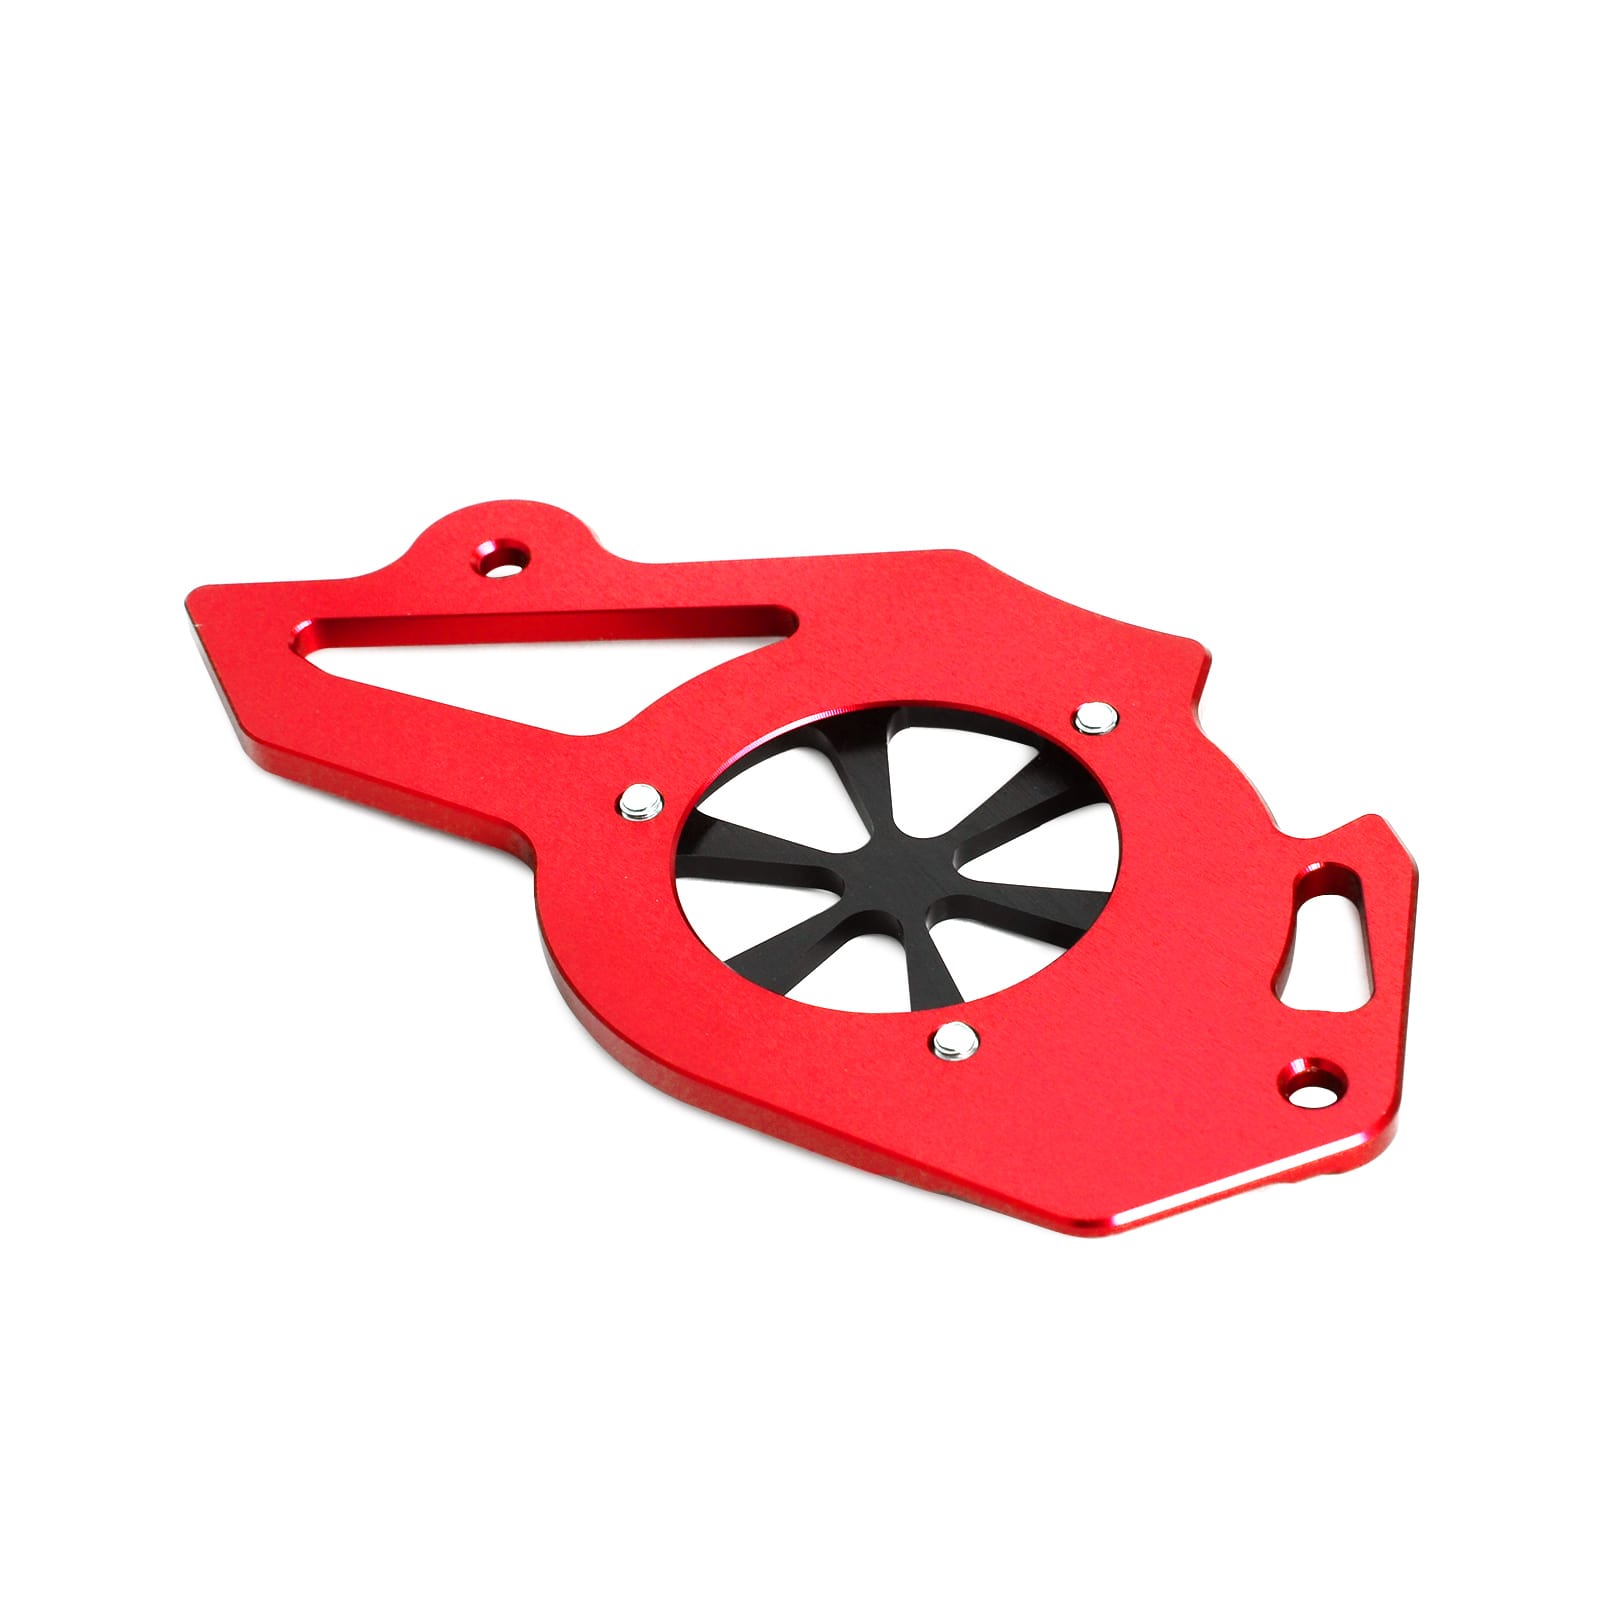 Front Sprocket Cover Guard Protector For Honda CRF250L/M 2012-2018